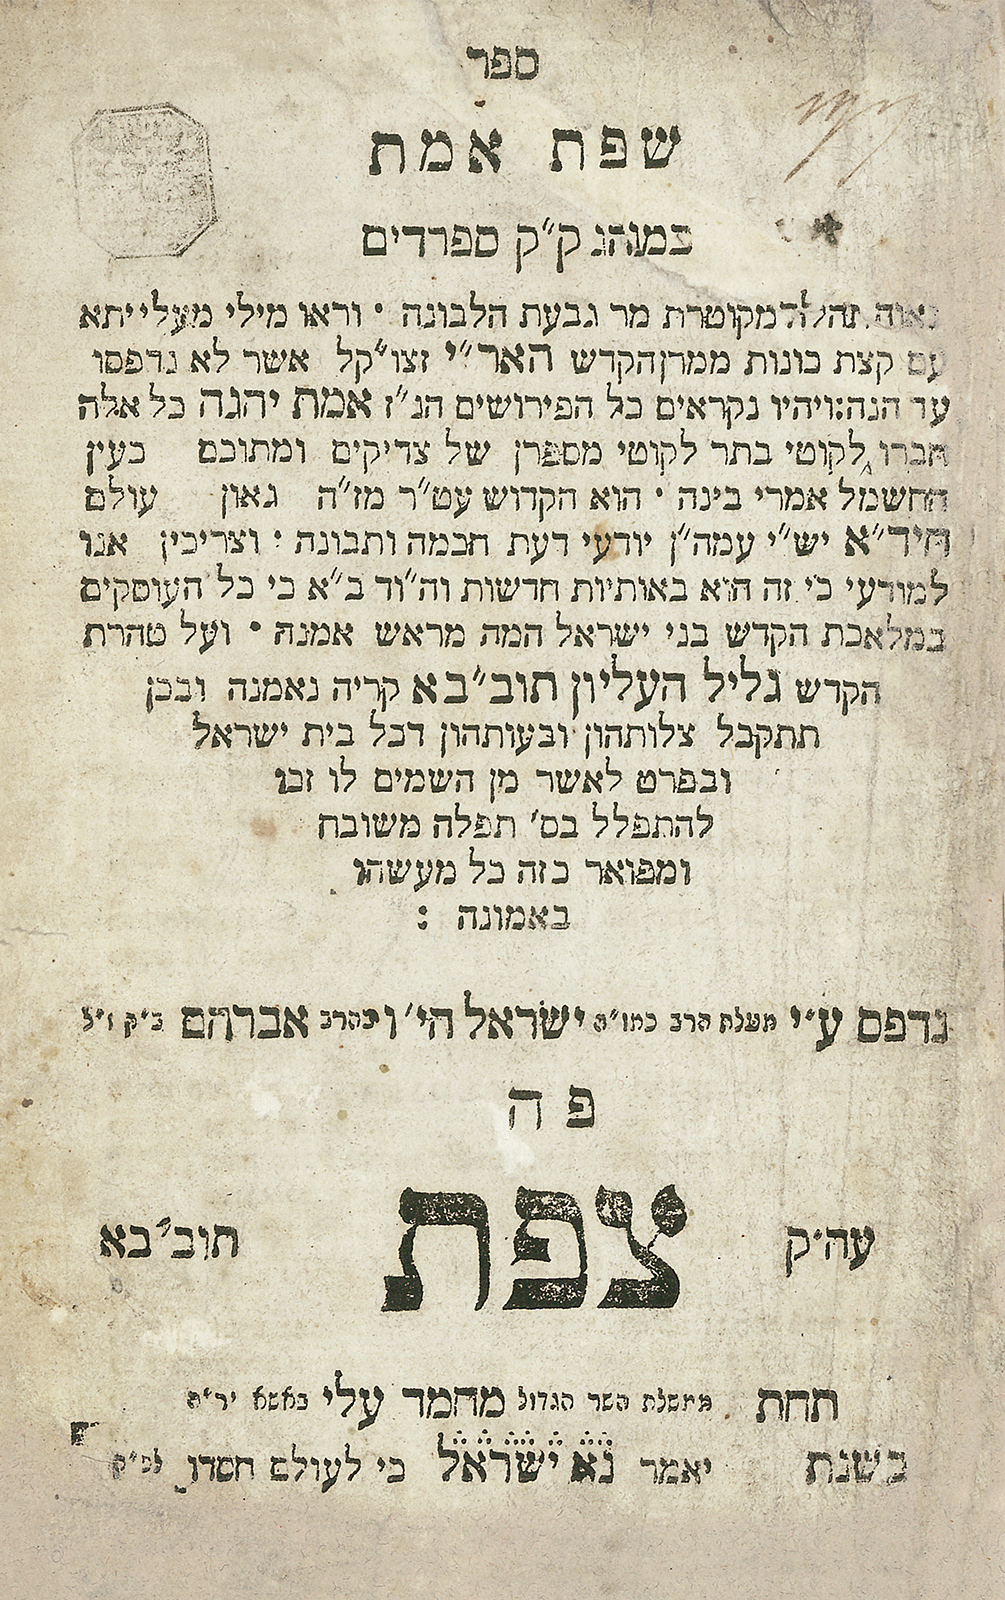 <p>Sepher Sephath Emeth.</p>
<p>The First Prayer-Book Printed in the Land of Israel.</p>
<p>Safed, 1832.</p>
<p>Sold at auction 7th April, 2016.</p>
<p>Hammer-price: $25,000.</p>